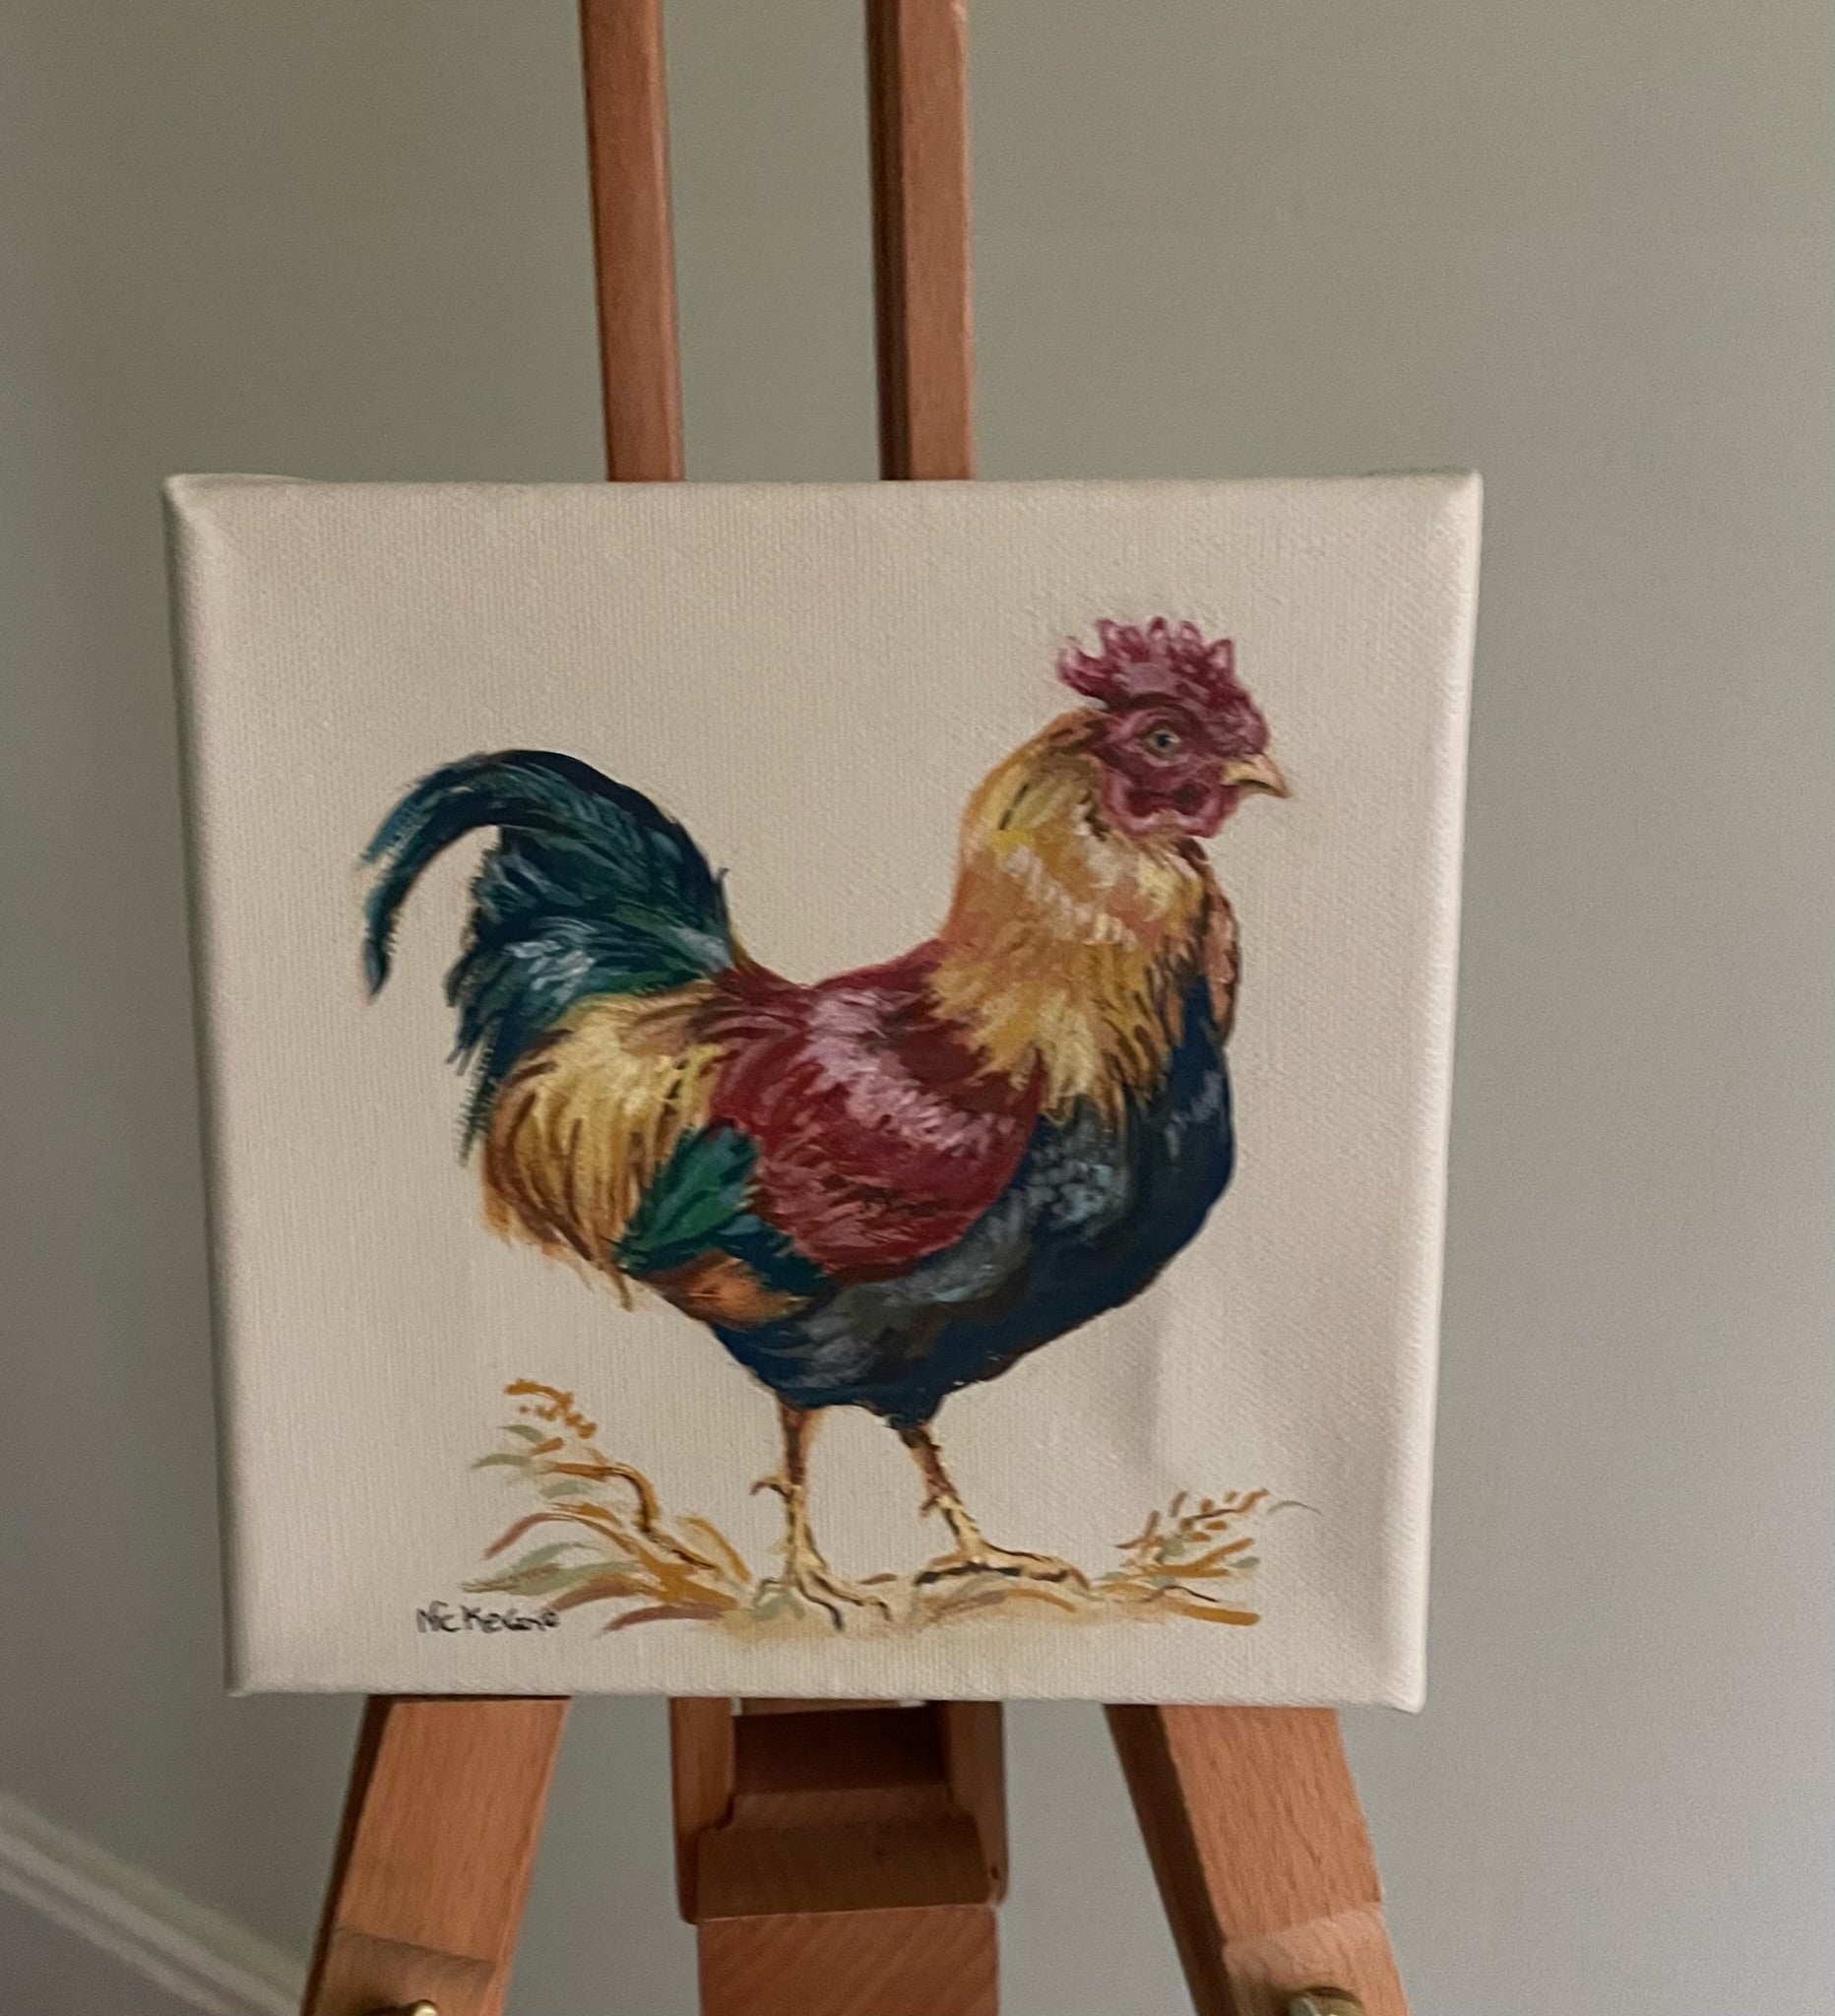 Standing Cockerel - 15cm x 15cm mini paintings depicting various countryside subjects.